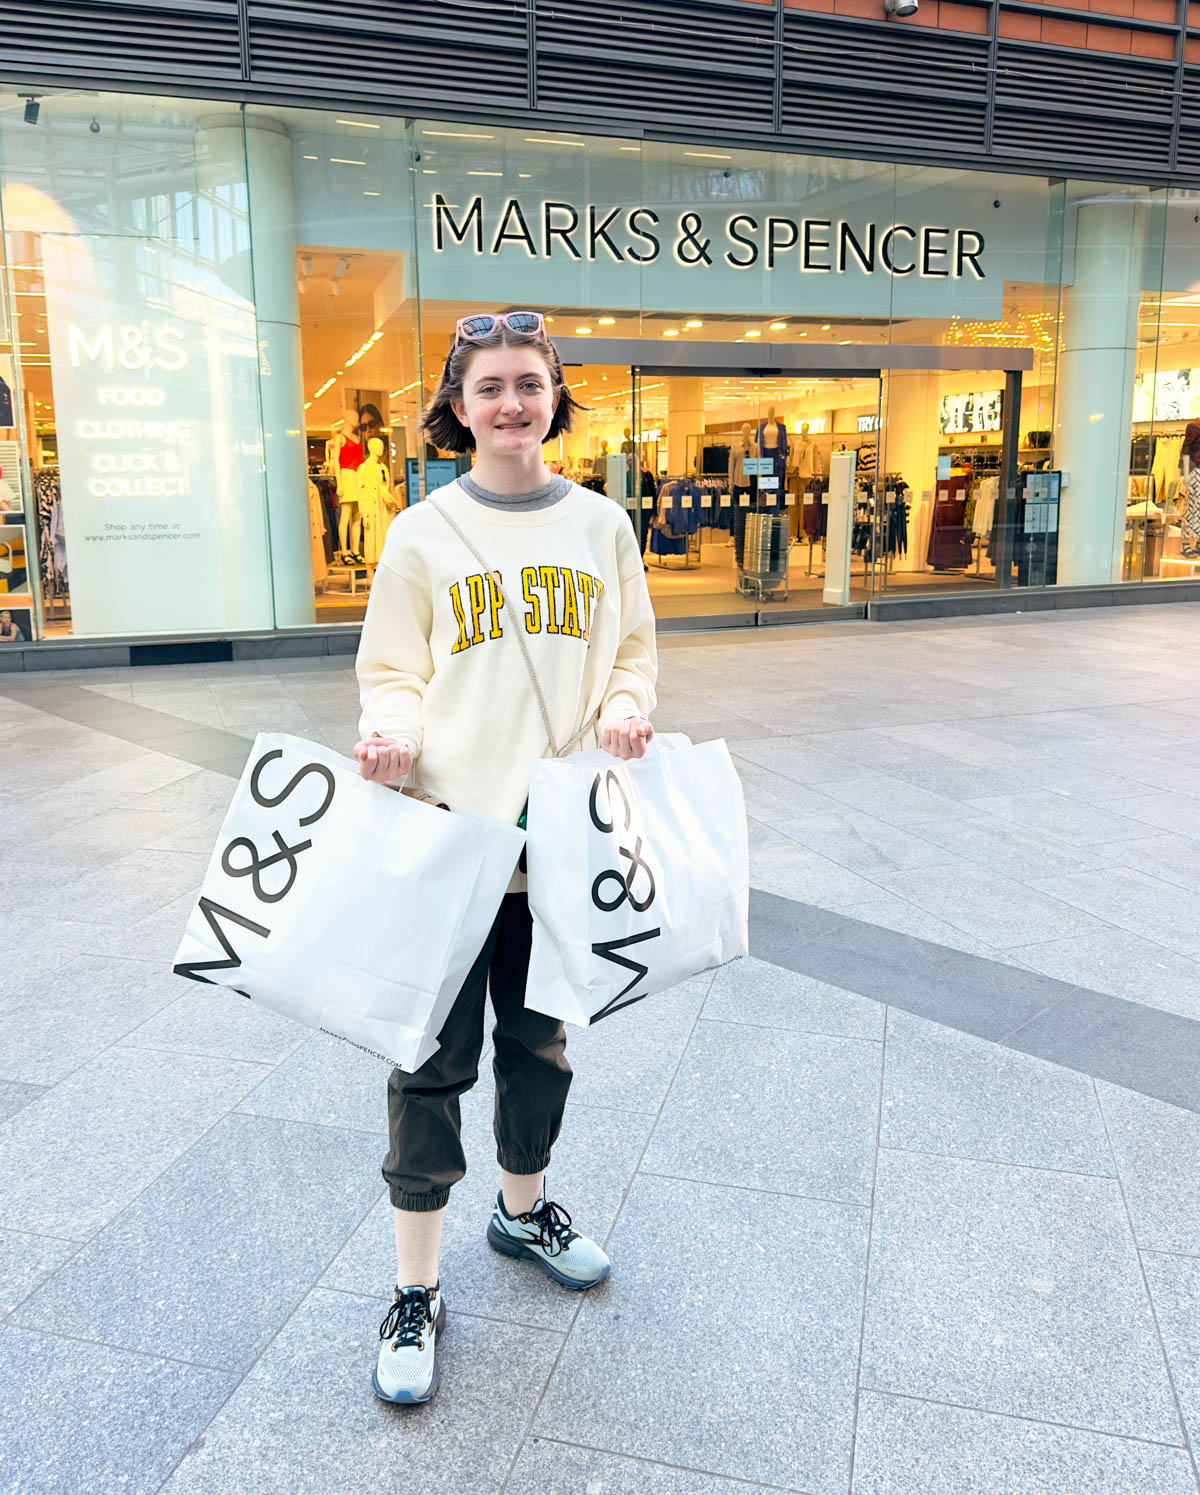 A young girl holds shopping bags in front of Marks & Spencer.